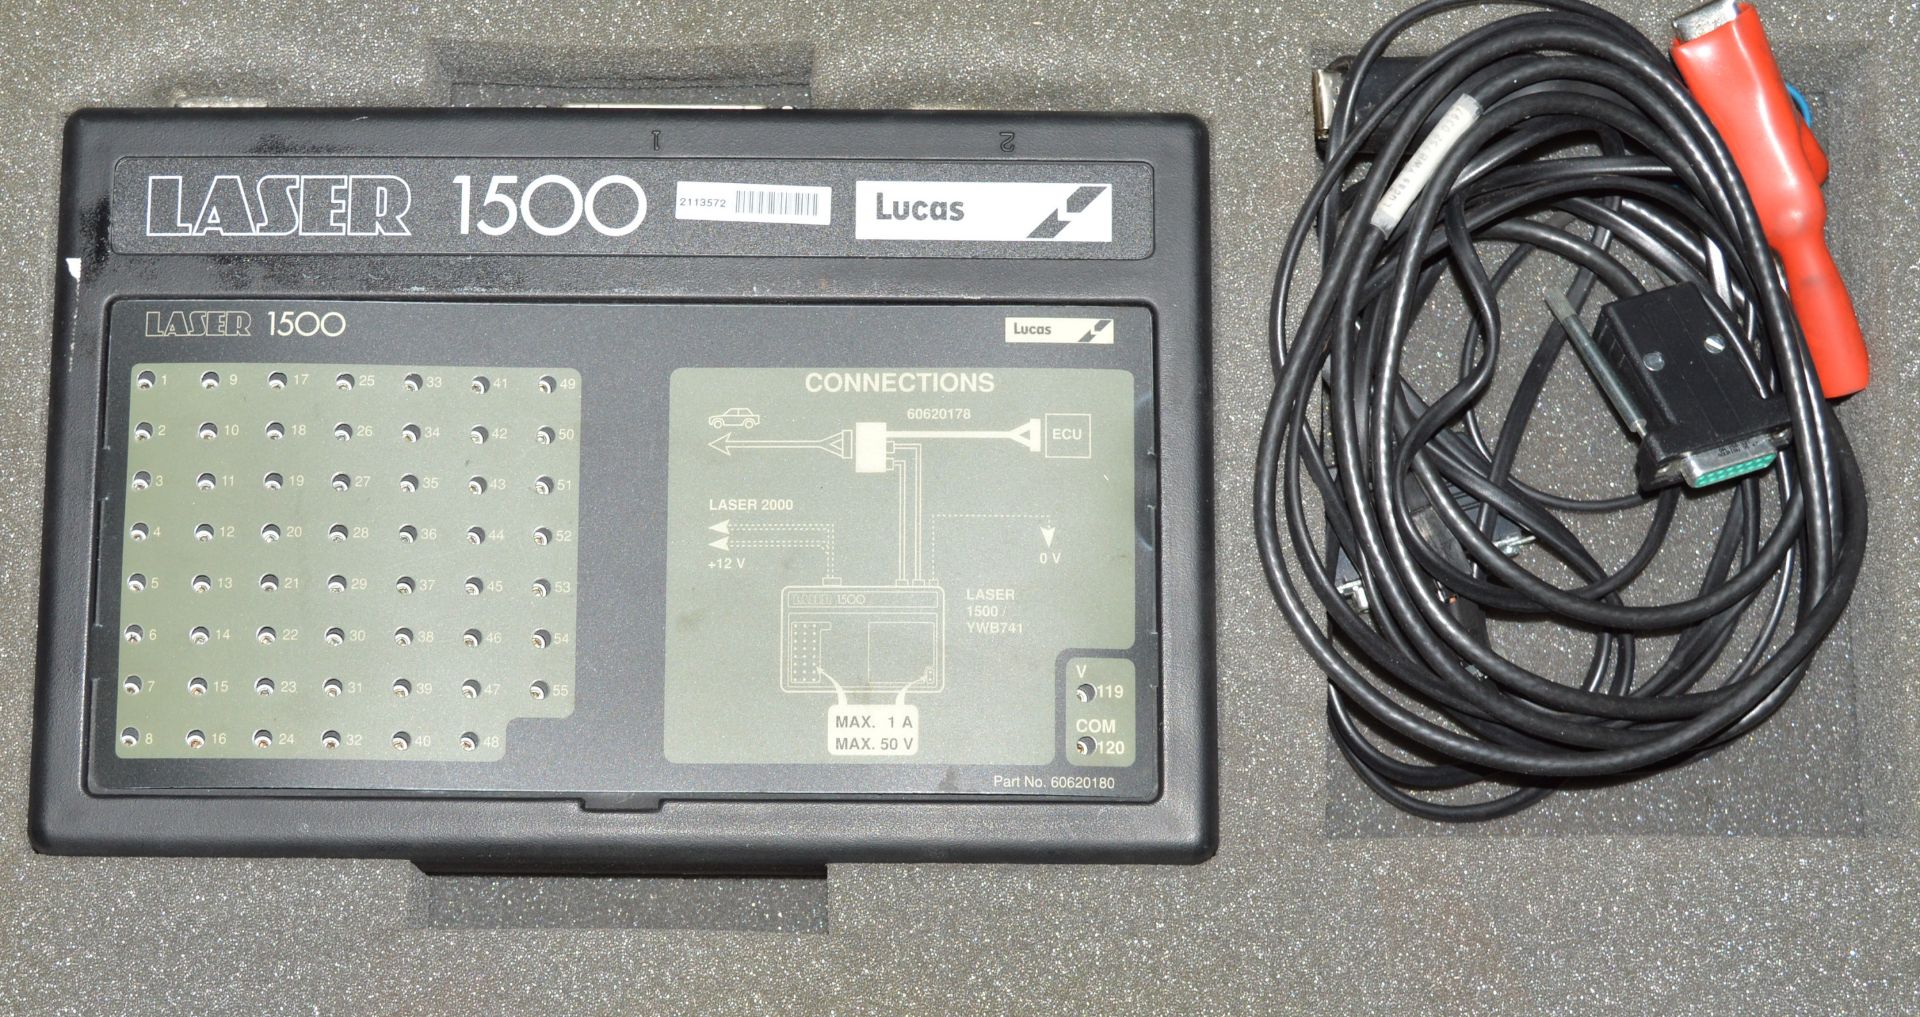 Lucas Laser 1500 Electronic Systems Tester - Image 2 of 3